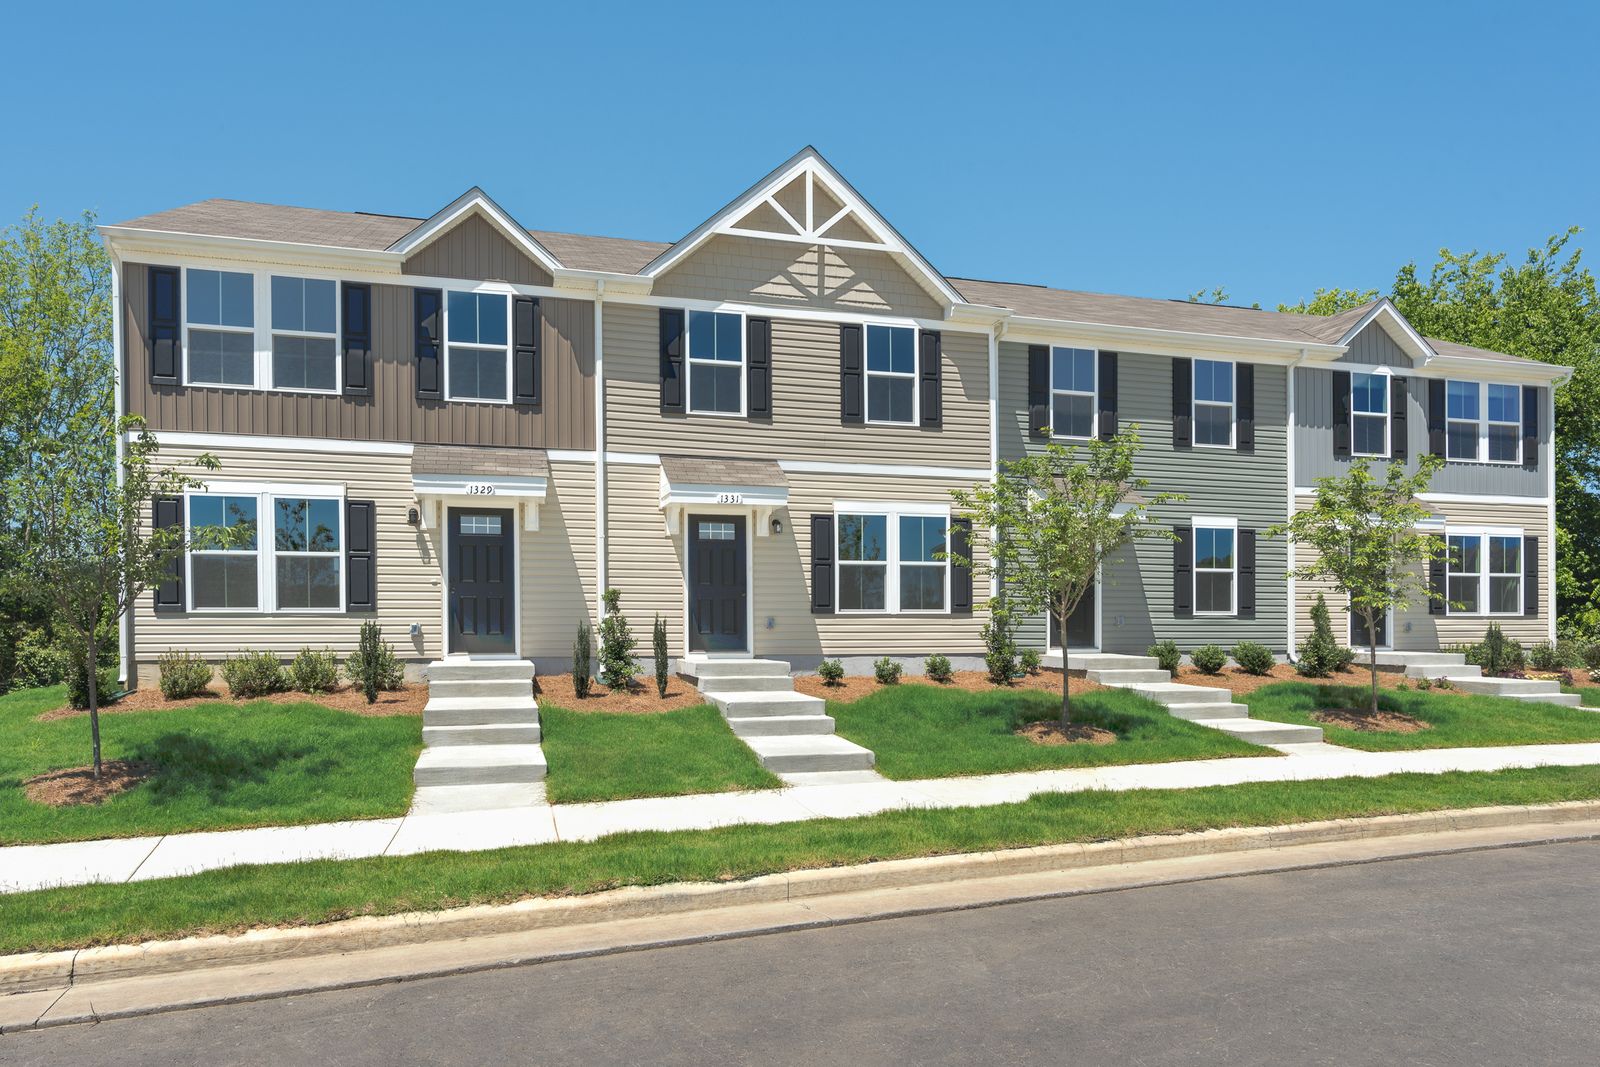 Final Townhomes Released!